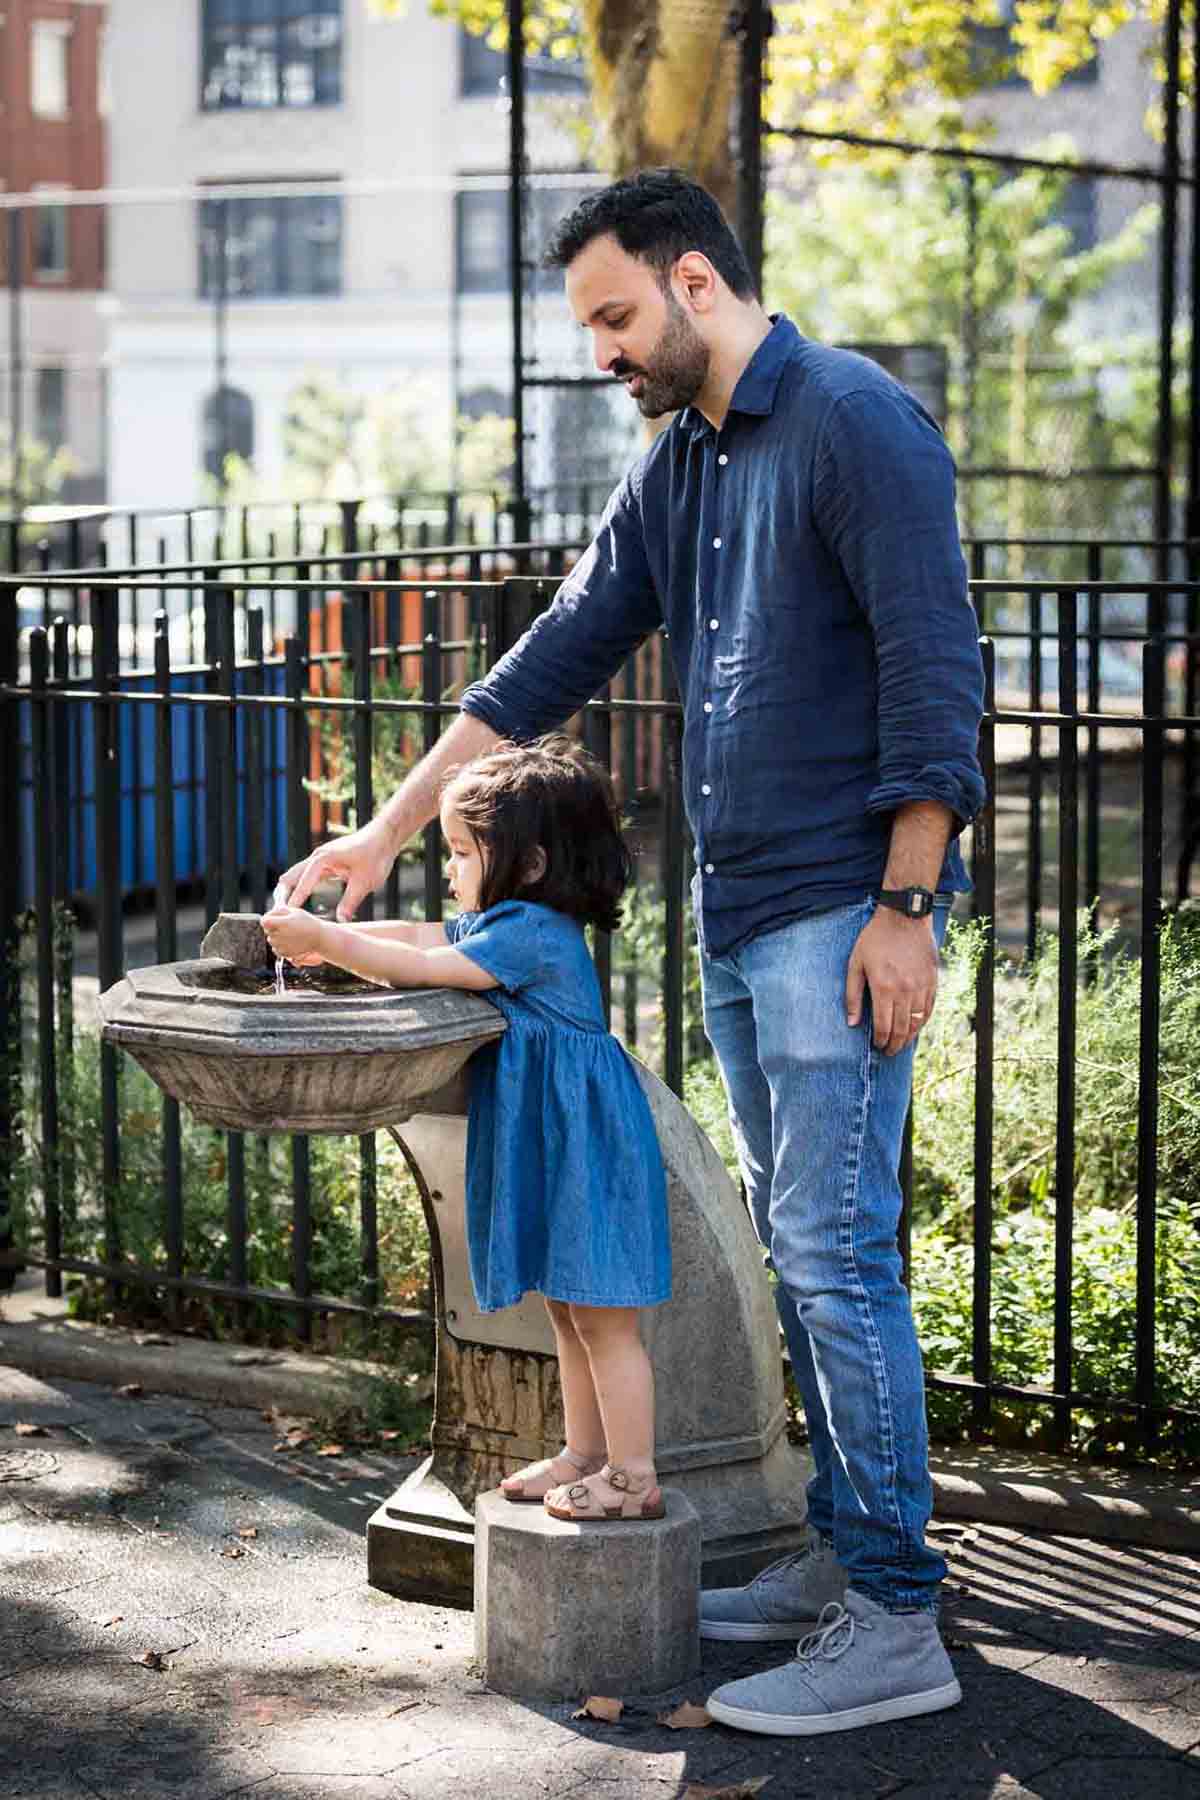 Father helping little girl in blue dress wash hands in water fountain in McLaughlin Park